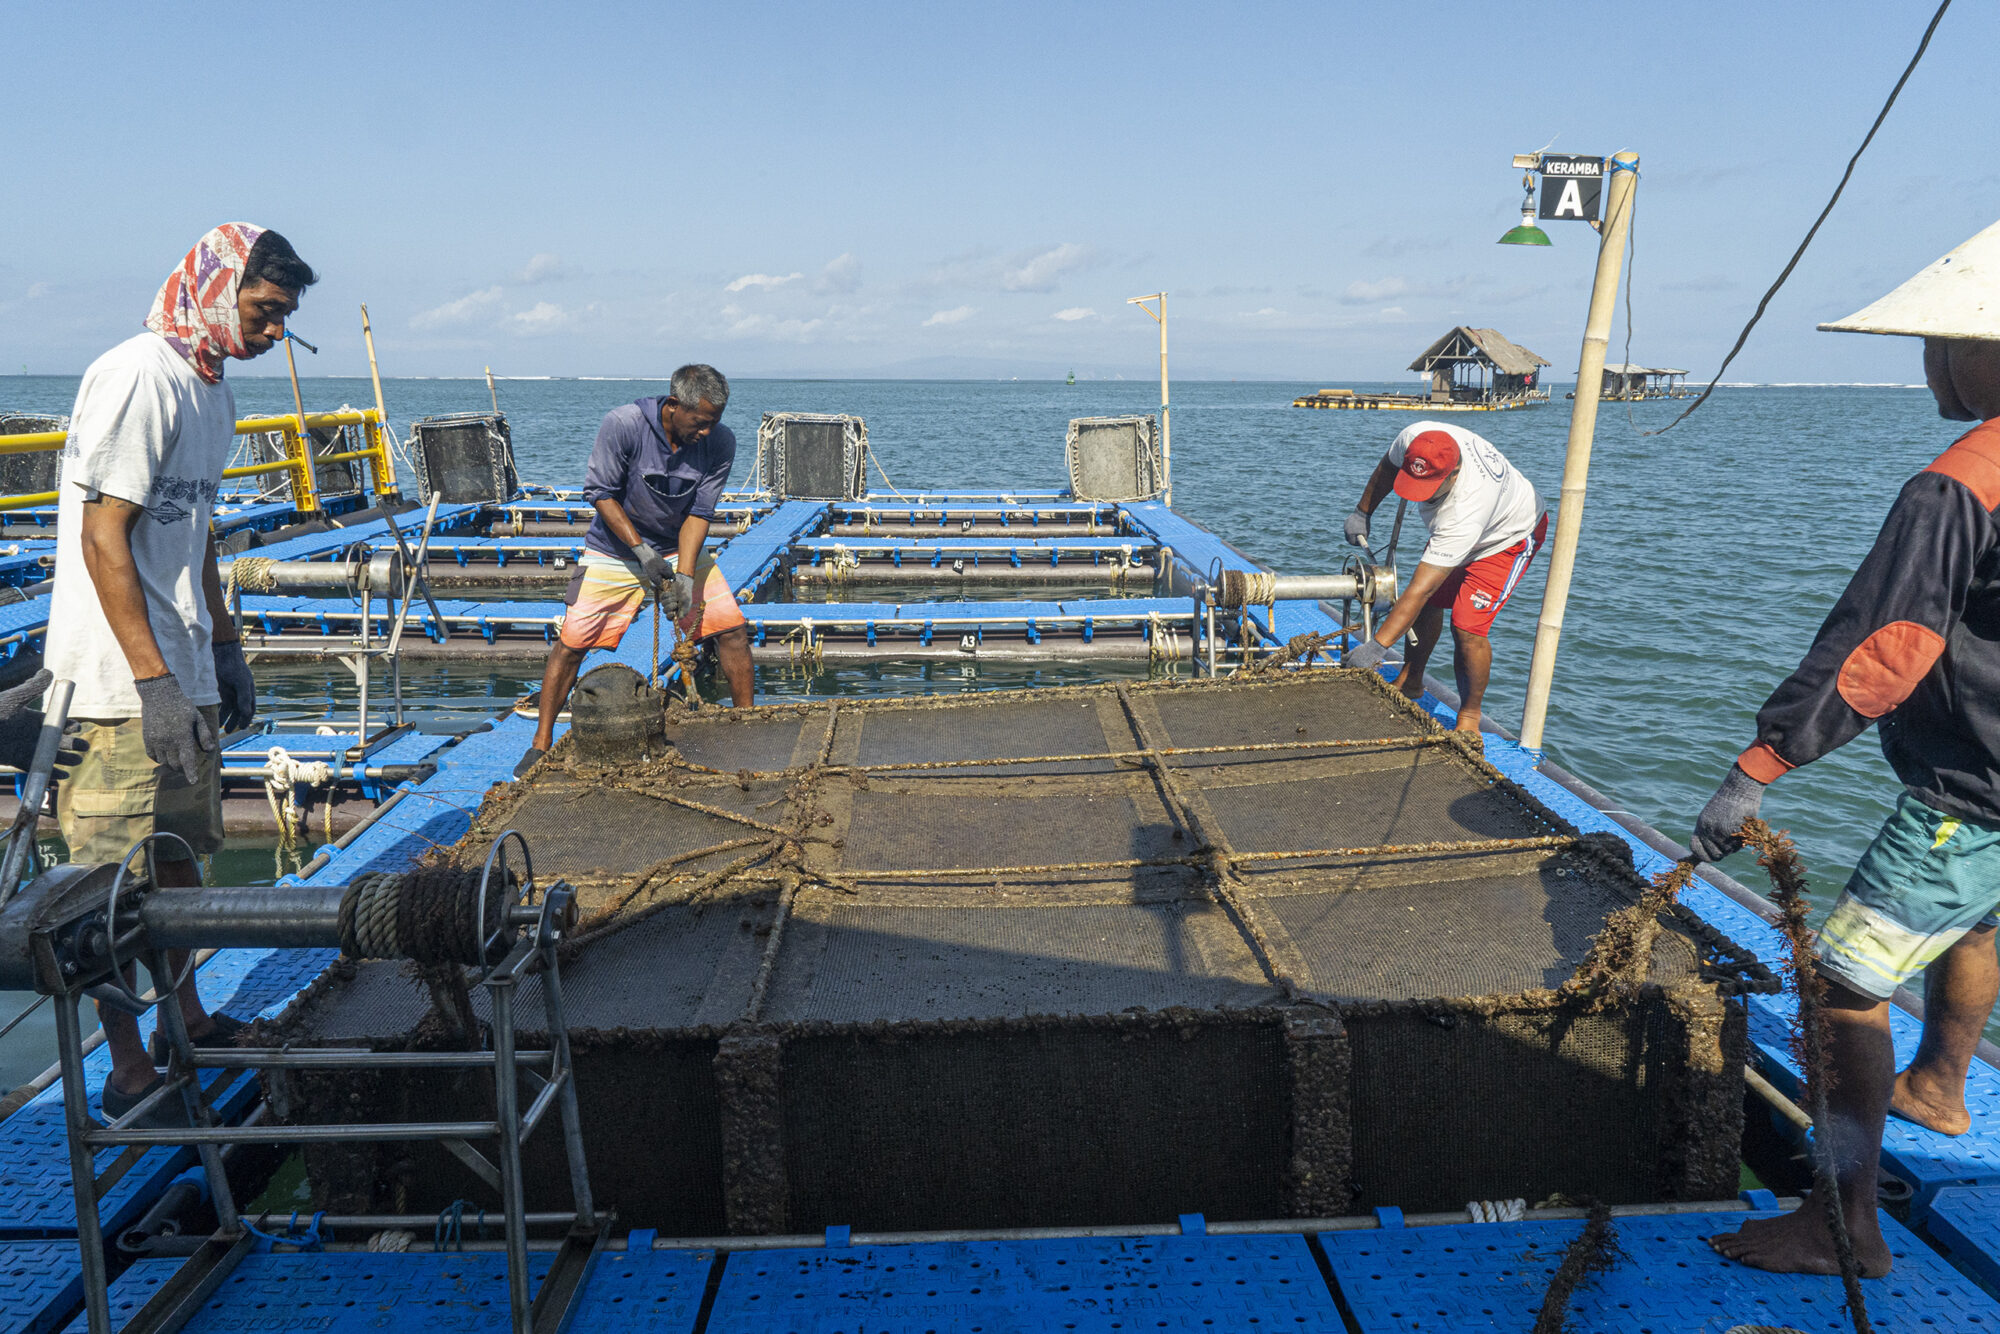 Indonesia fisheries: Workers on a floating farm near the village of Serangan in Bali winch up a lobster cage for cleaning and feeding